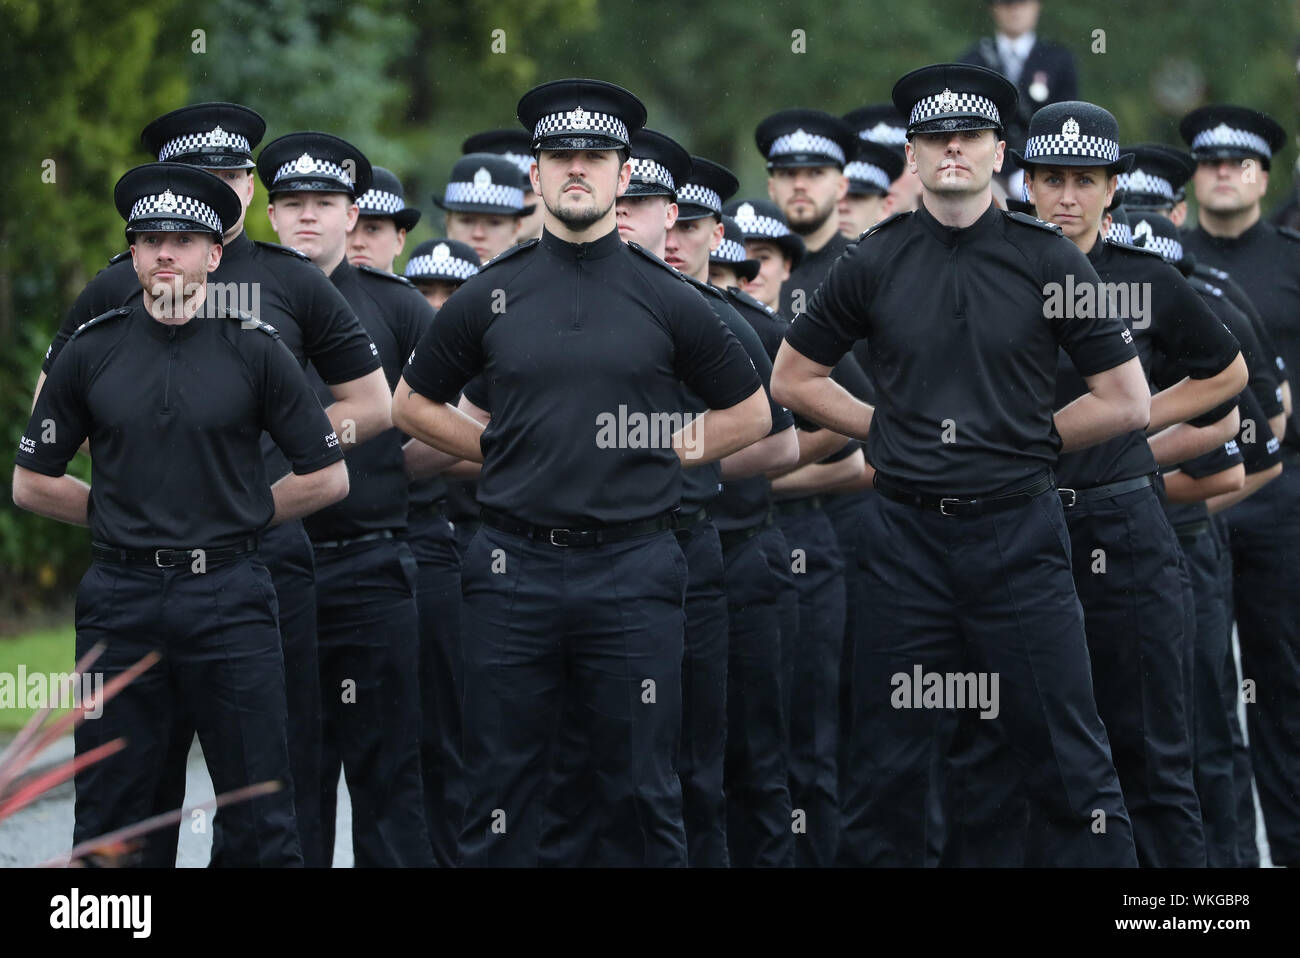 Police Scotland officers on probation, take part in the Scottish Police Memorial Service at Police Scotland headquarters at Tulliallan. PA Photo. Picture date: Wednesday September 4, 2019. The annual event, is attended by the families of officers who have died on duty in Scotland, as well as senior officers and politicians. This year the constitution of the Scottish Police Memorial Trust has been amended to enable the names of all those who died on duty whilst serving with a policing agency in Scotland to also be included on the memorial at Tulliallan. See PA story SCOTLAND Memorial. Photo Stock Photo